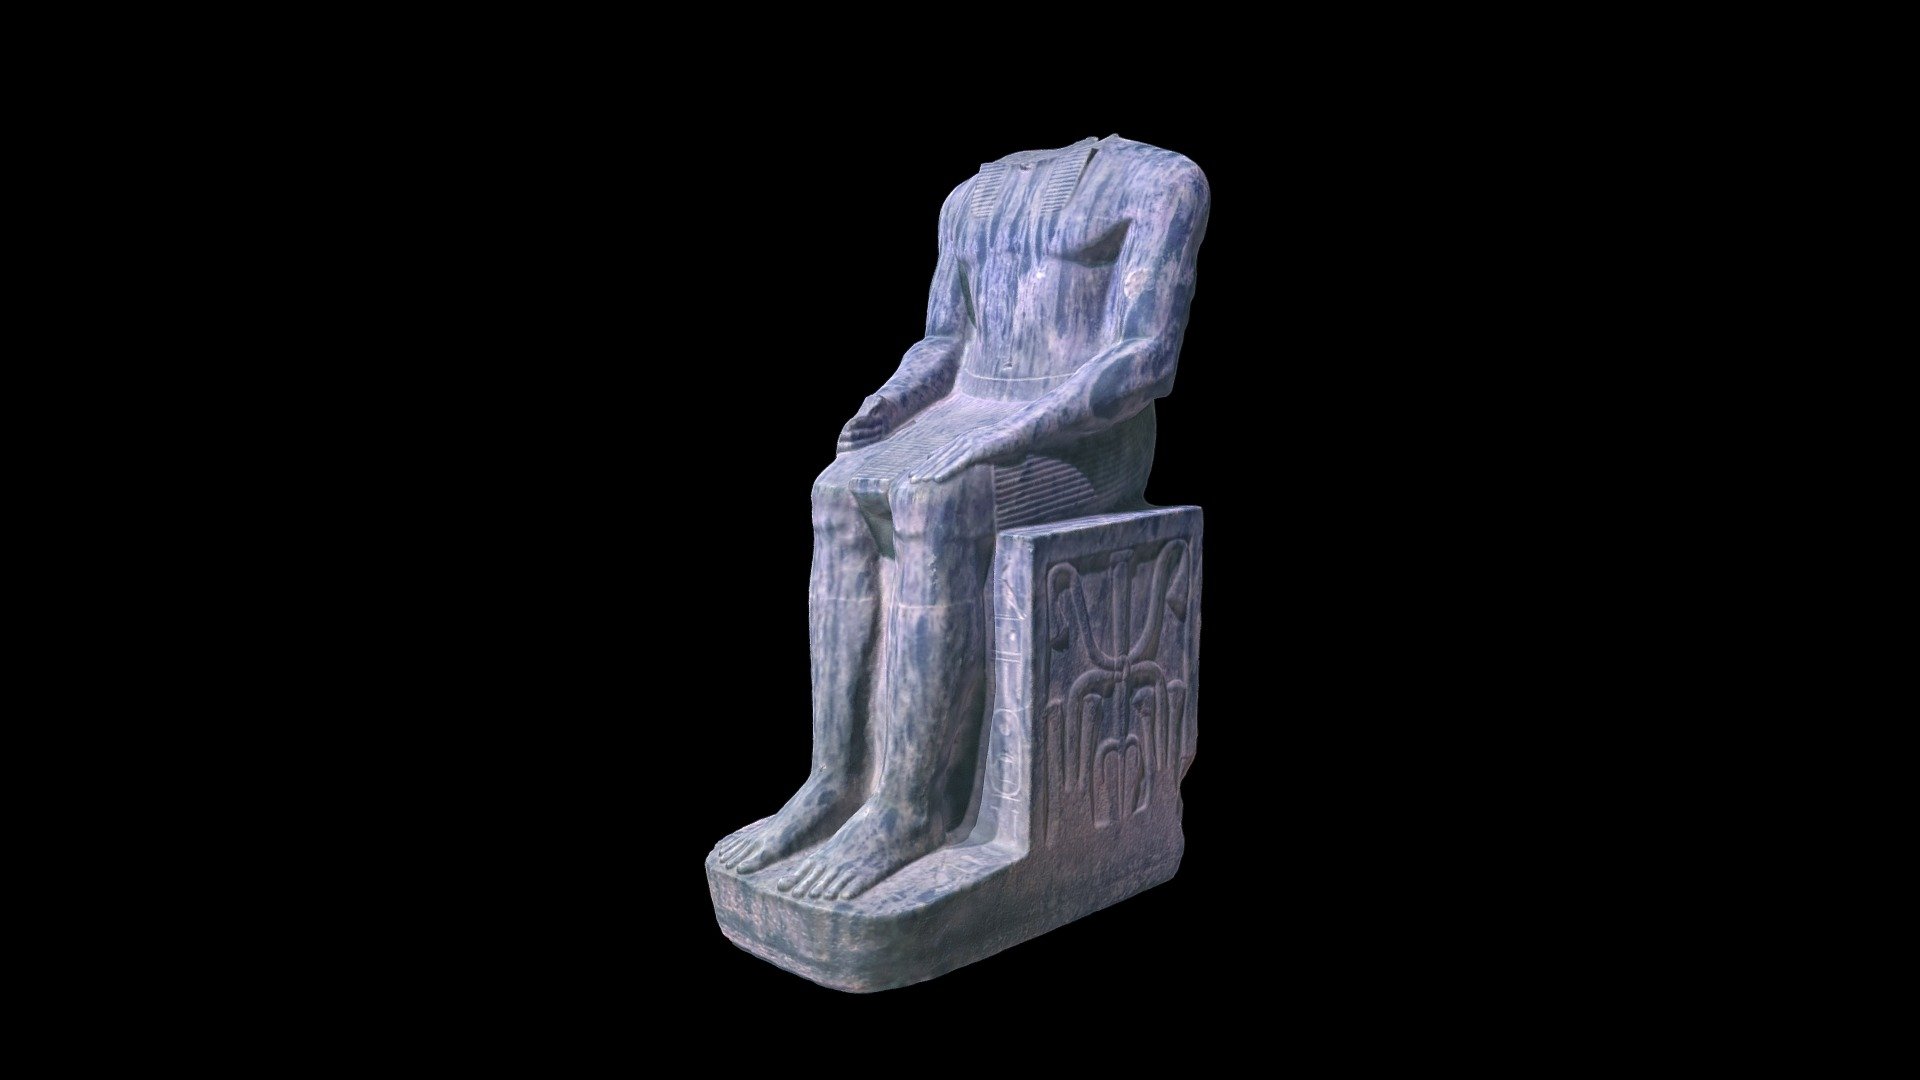 Carved diorite statue of Khafre seated on a throne.  Recovered from the Khafre Quarries at Giza.  Fourth Dynasty. Formally Cairo Museum CG10.
Similar, but not identica, to the famous seated statue of Khafe in the Cairo Museum (https://skfb.ly/6R7uV)

Created from 68 photographs (Canon EOS Rebel T7i) using Metashape 1.7.0 3d model